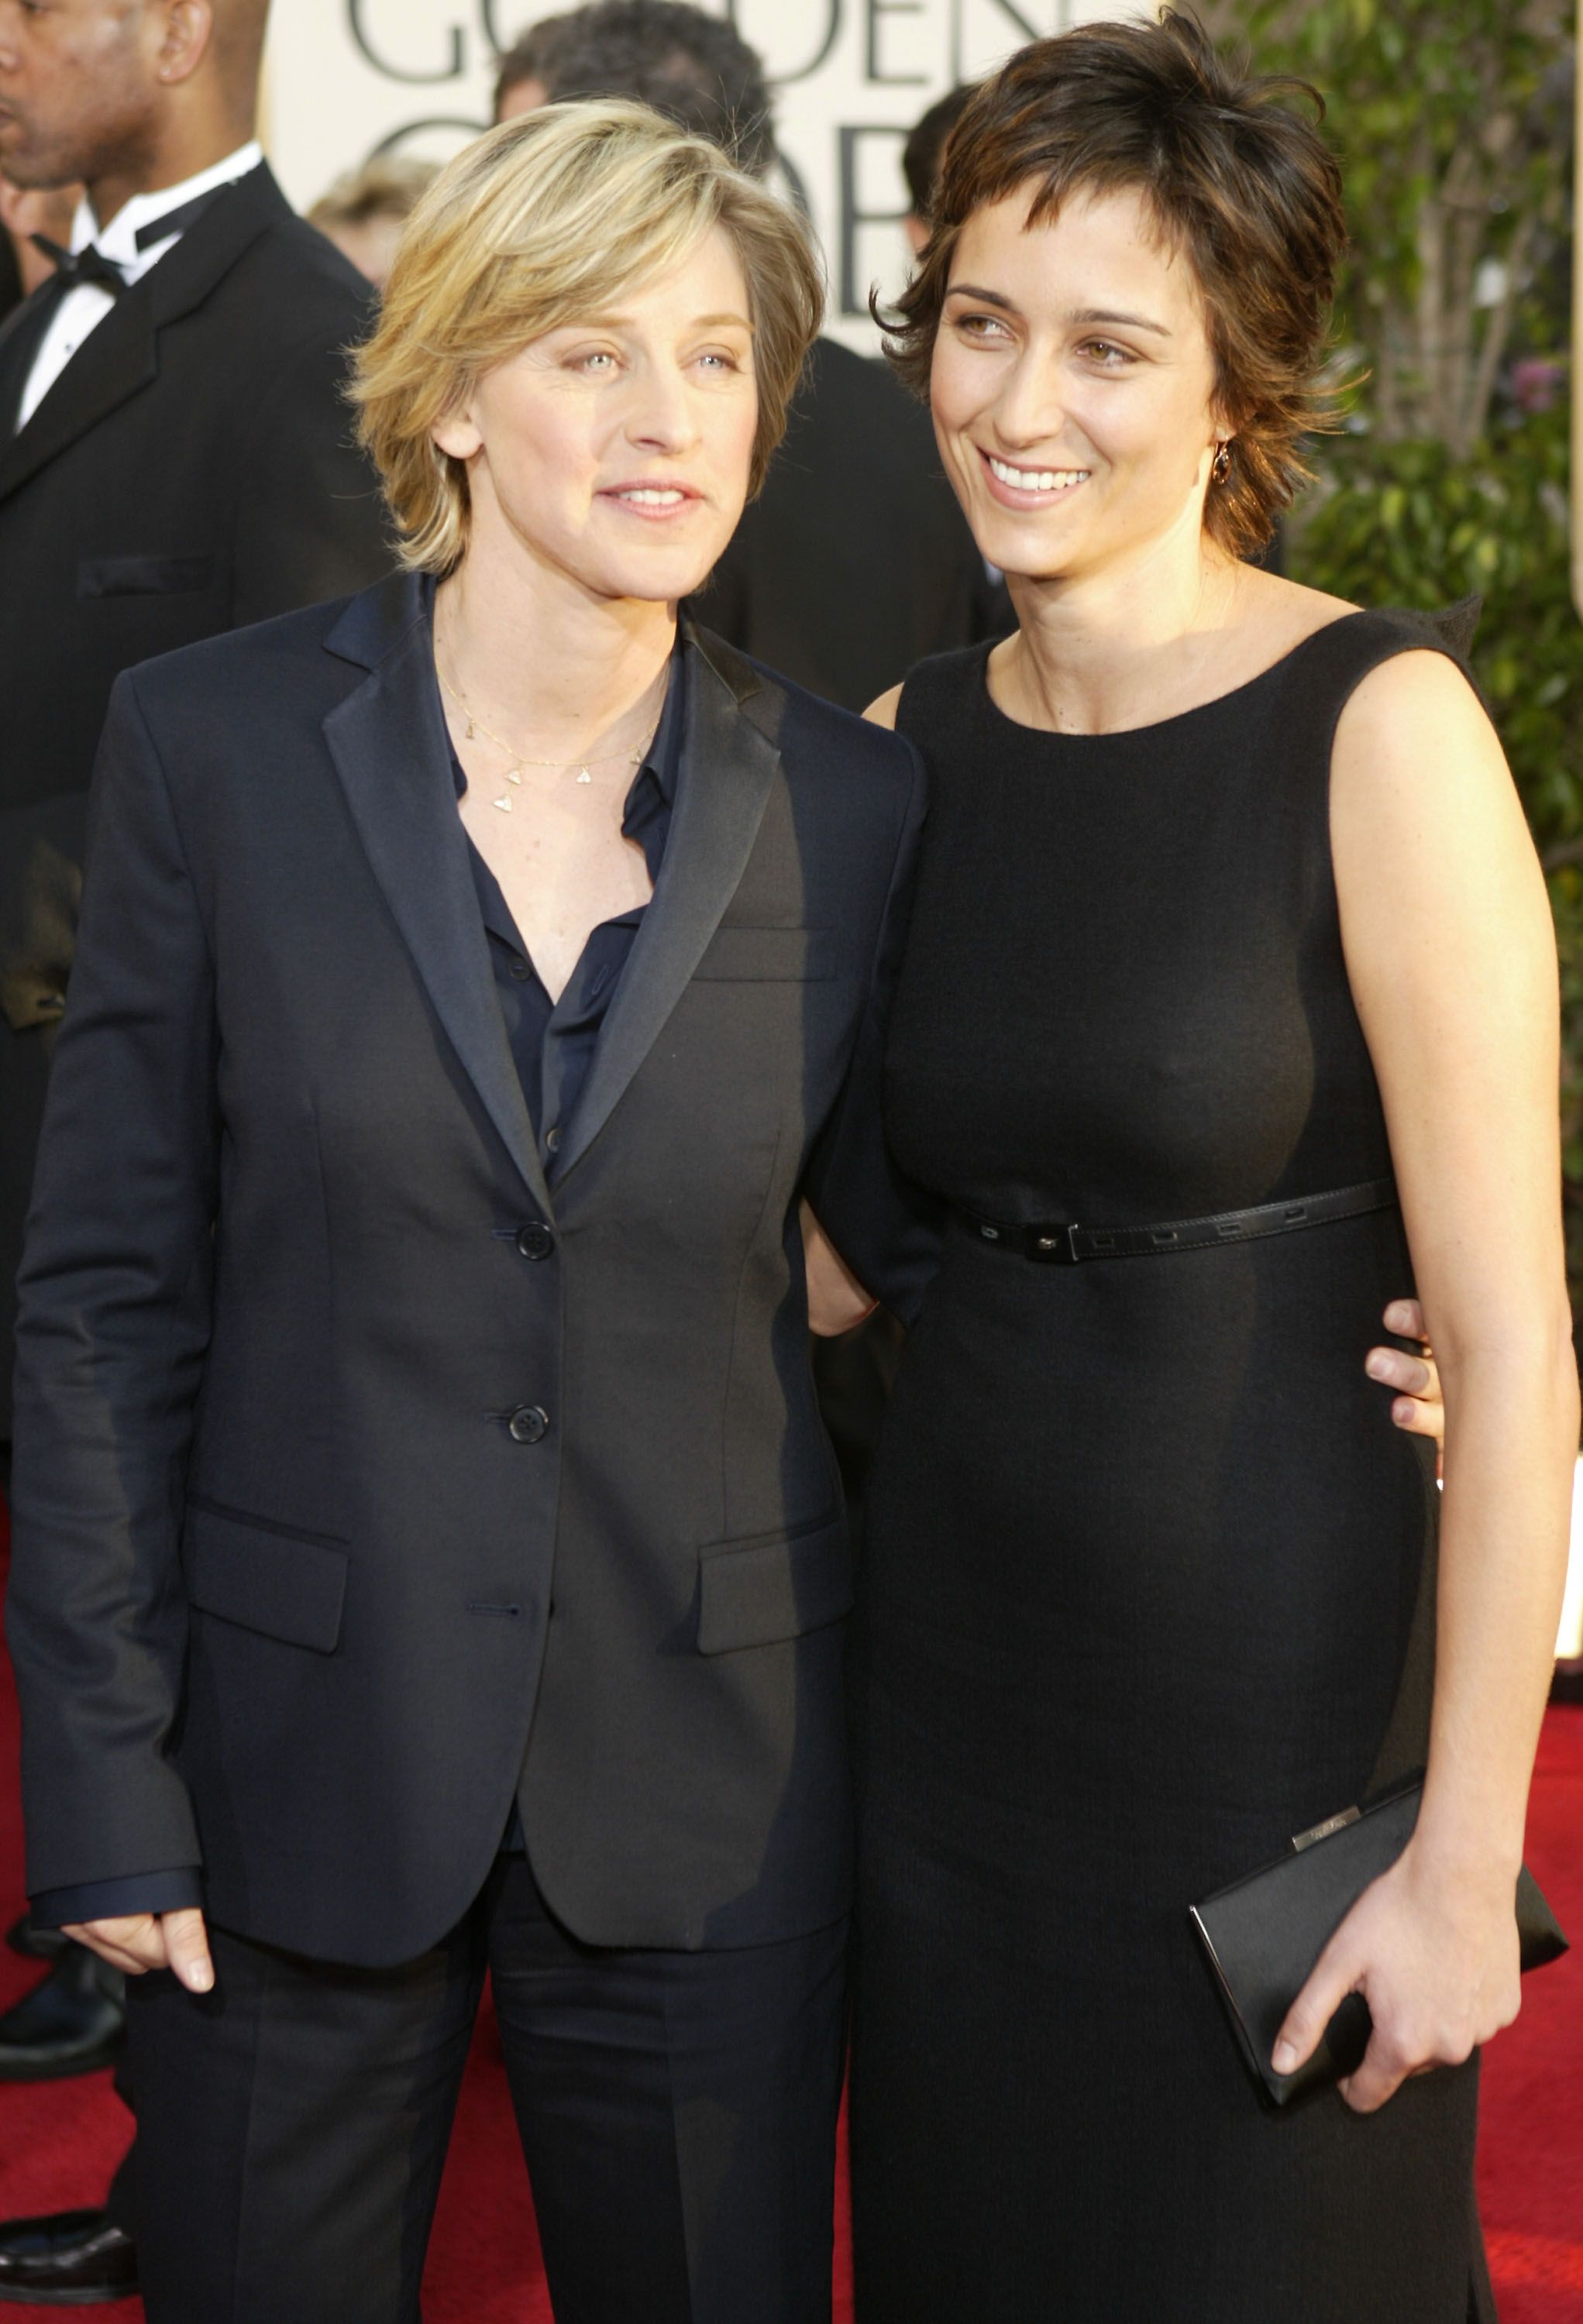 Ellen DeGeneres and Alexandra Hedison at the 61st Annual Golden Globe Awards in 2004 | Source: Getty Images